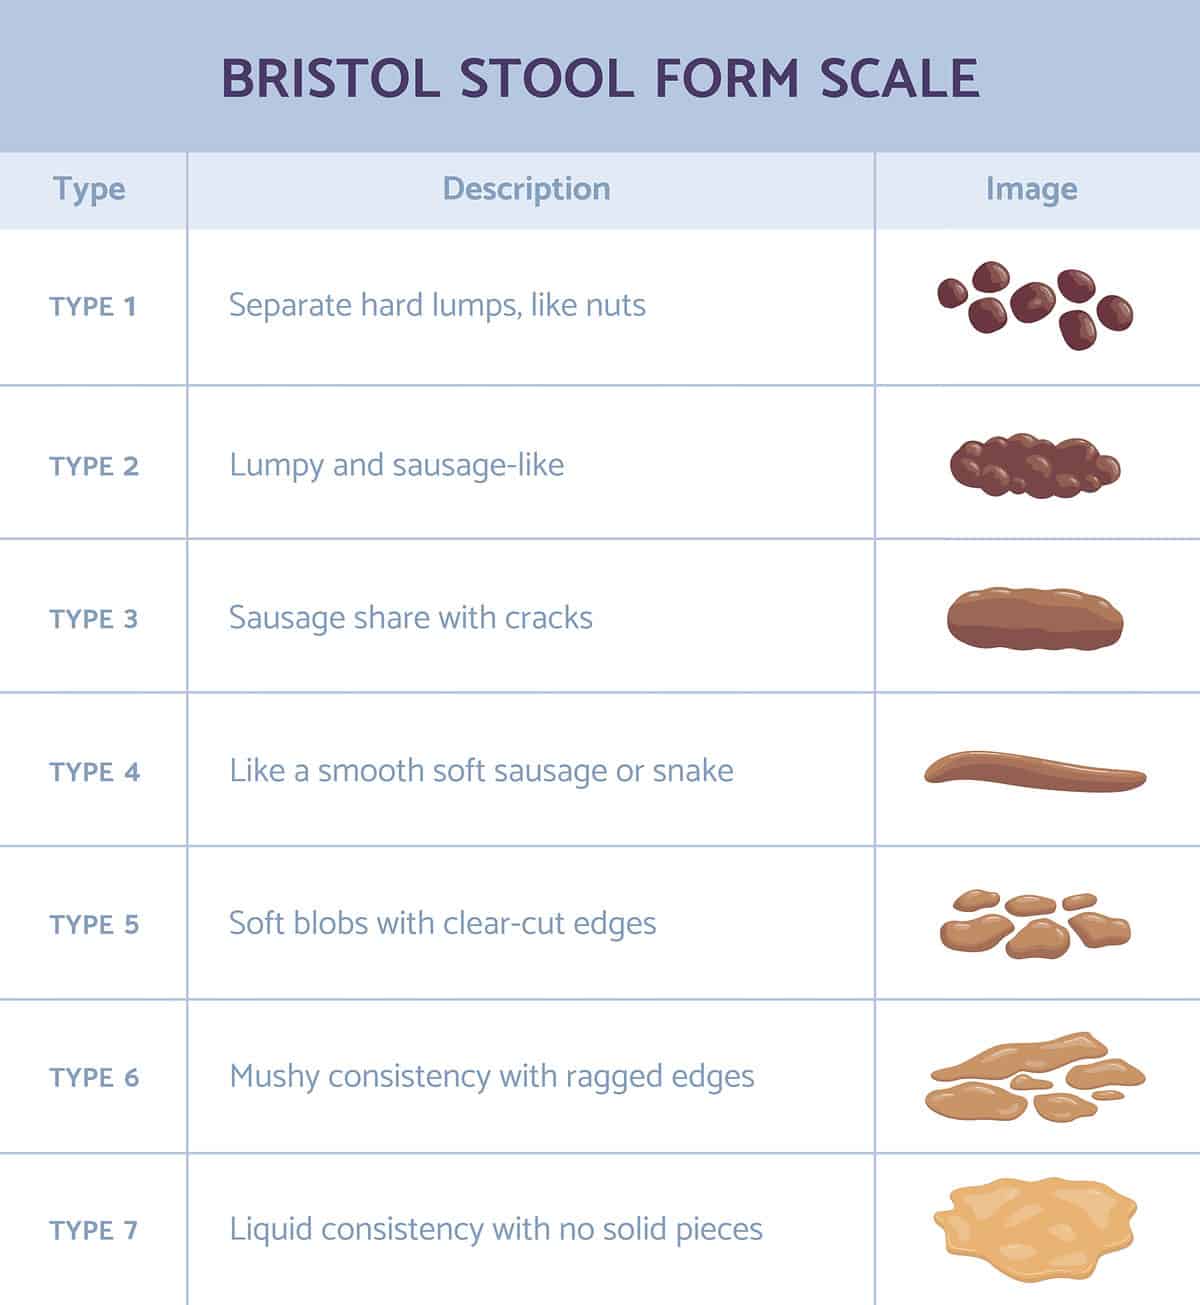 https://www.shutterstock.com/image-vector/bristol-stool-form-scale-infographic-faeces-1962550816